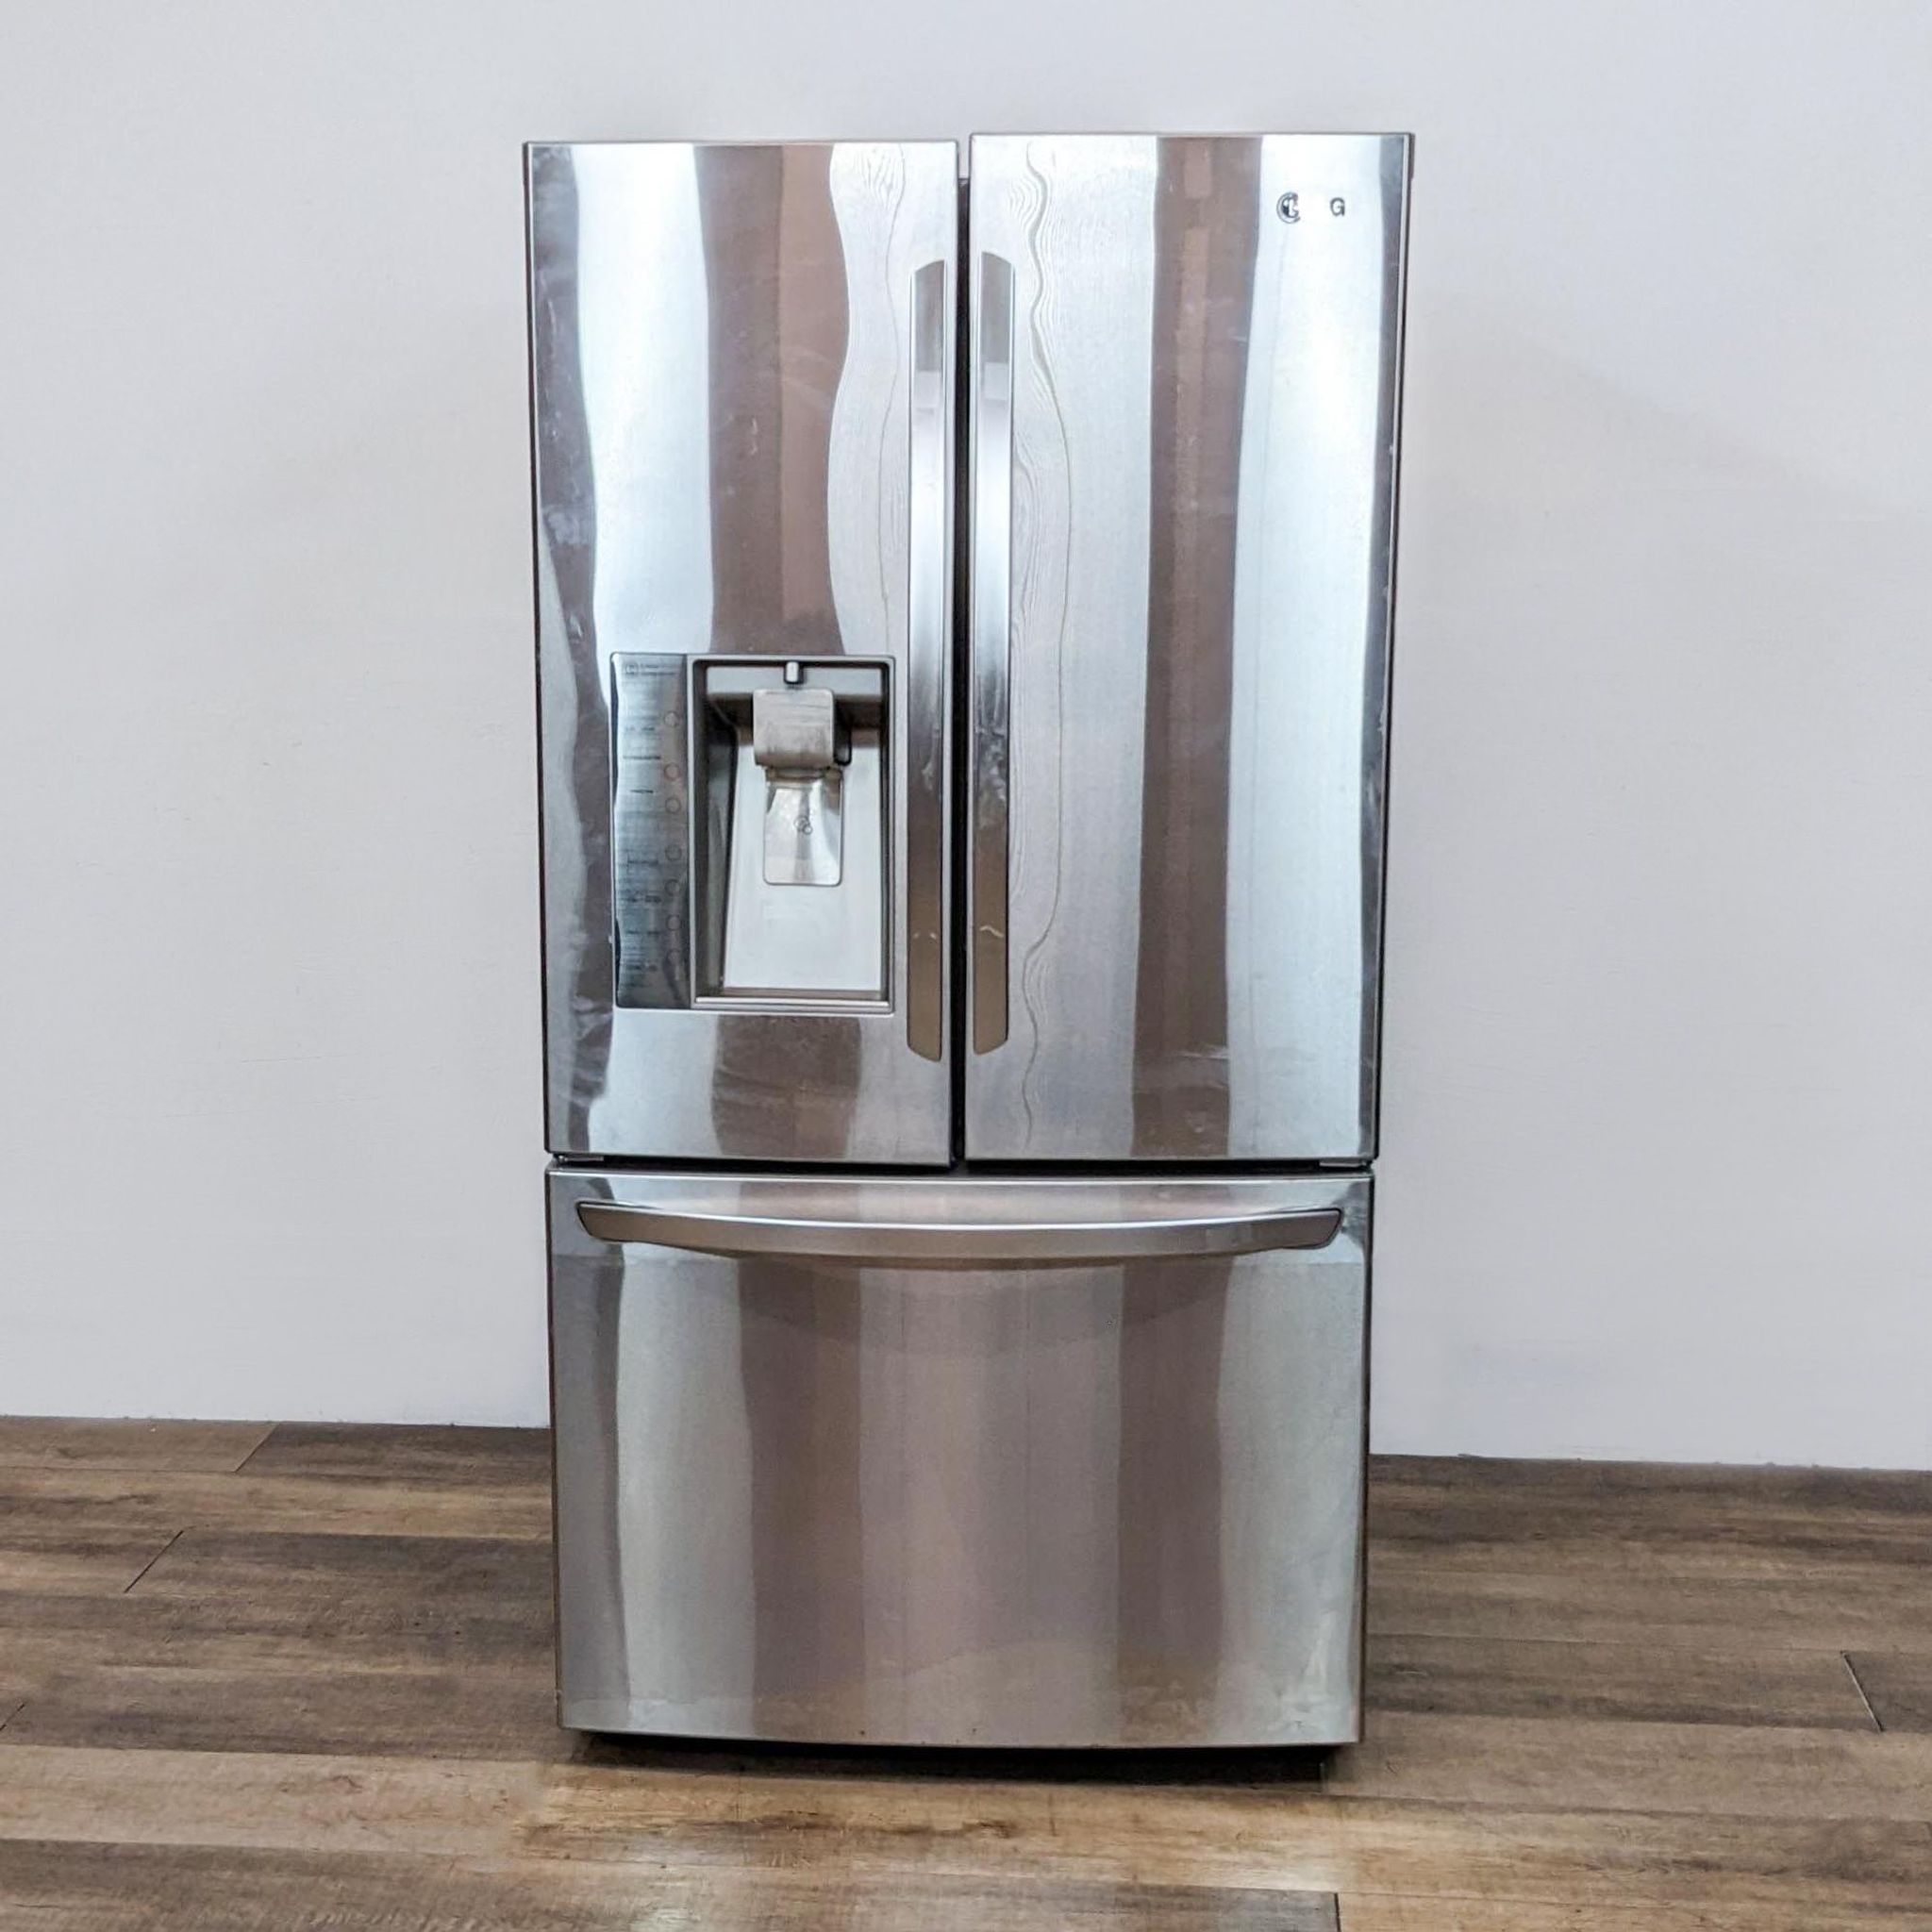 1. LG stainless steel French door refrigerator with water dispenser in a front-facing view, placed on a wooden floor.